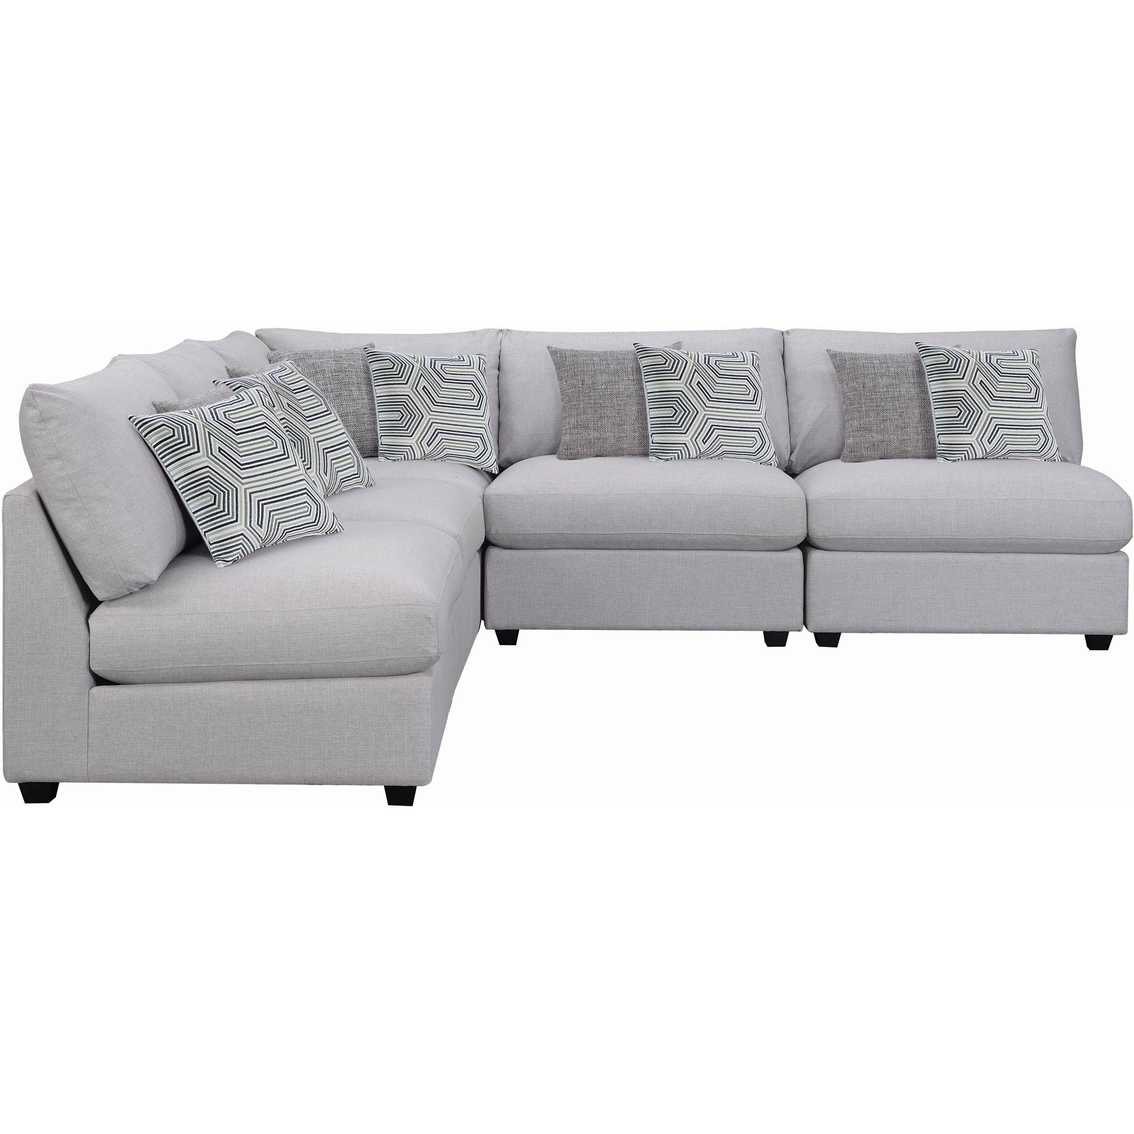 Coaster Charlotte 5 pc. Modern Sectional with 4 Armless Chairs/Corner Chair - Image 3 of 4